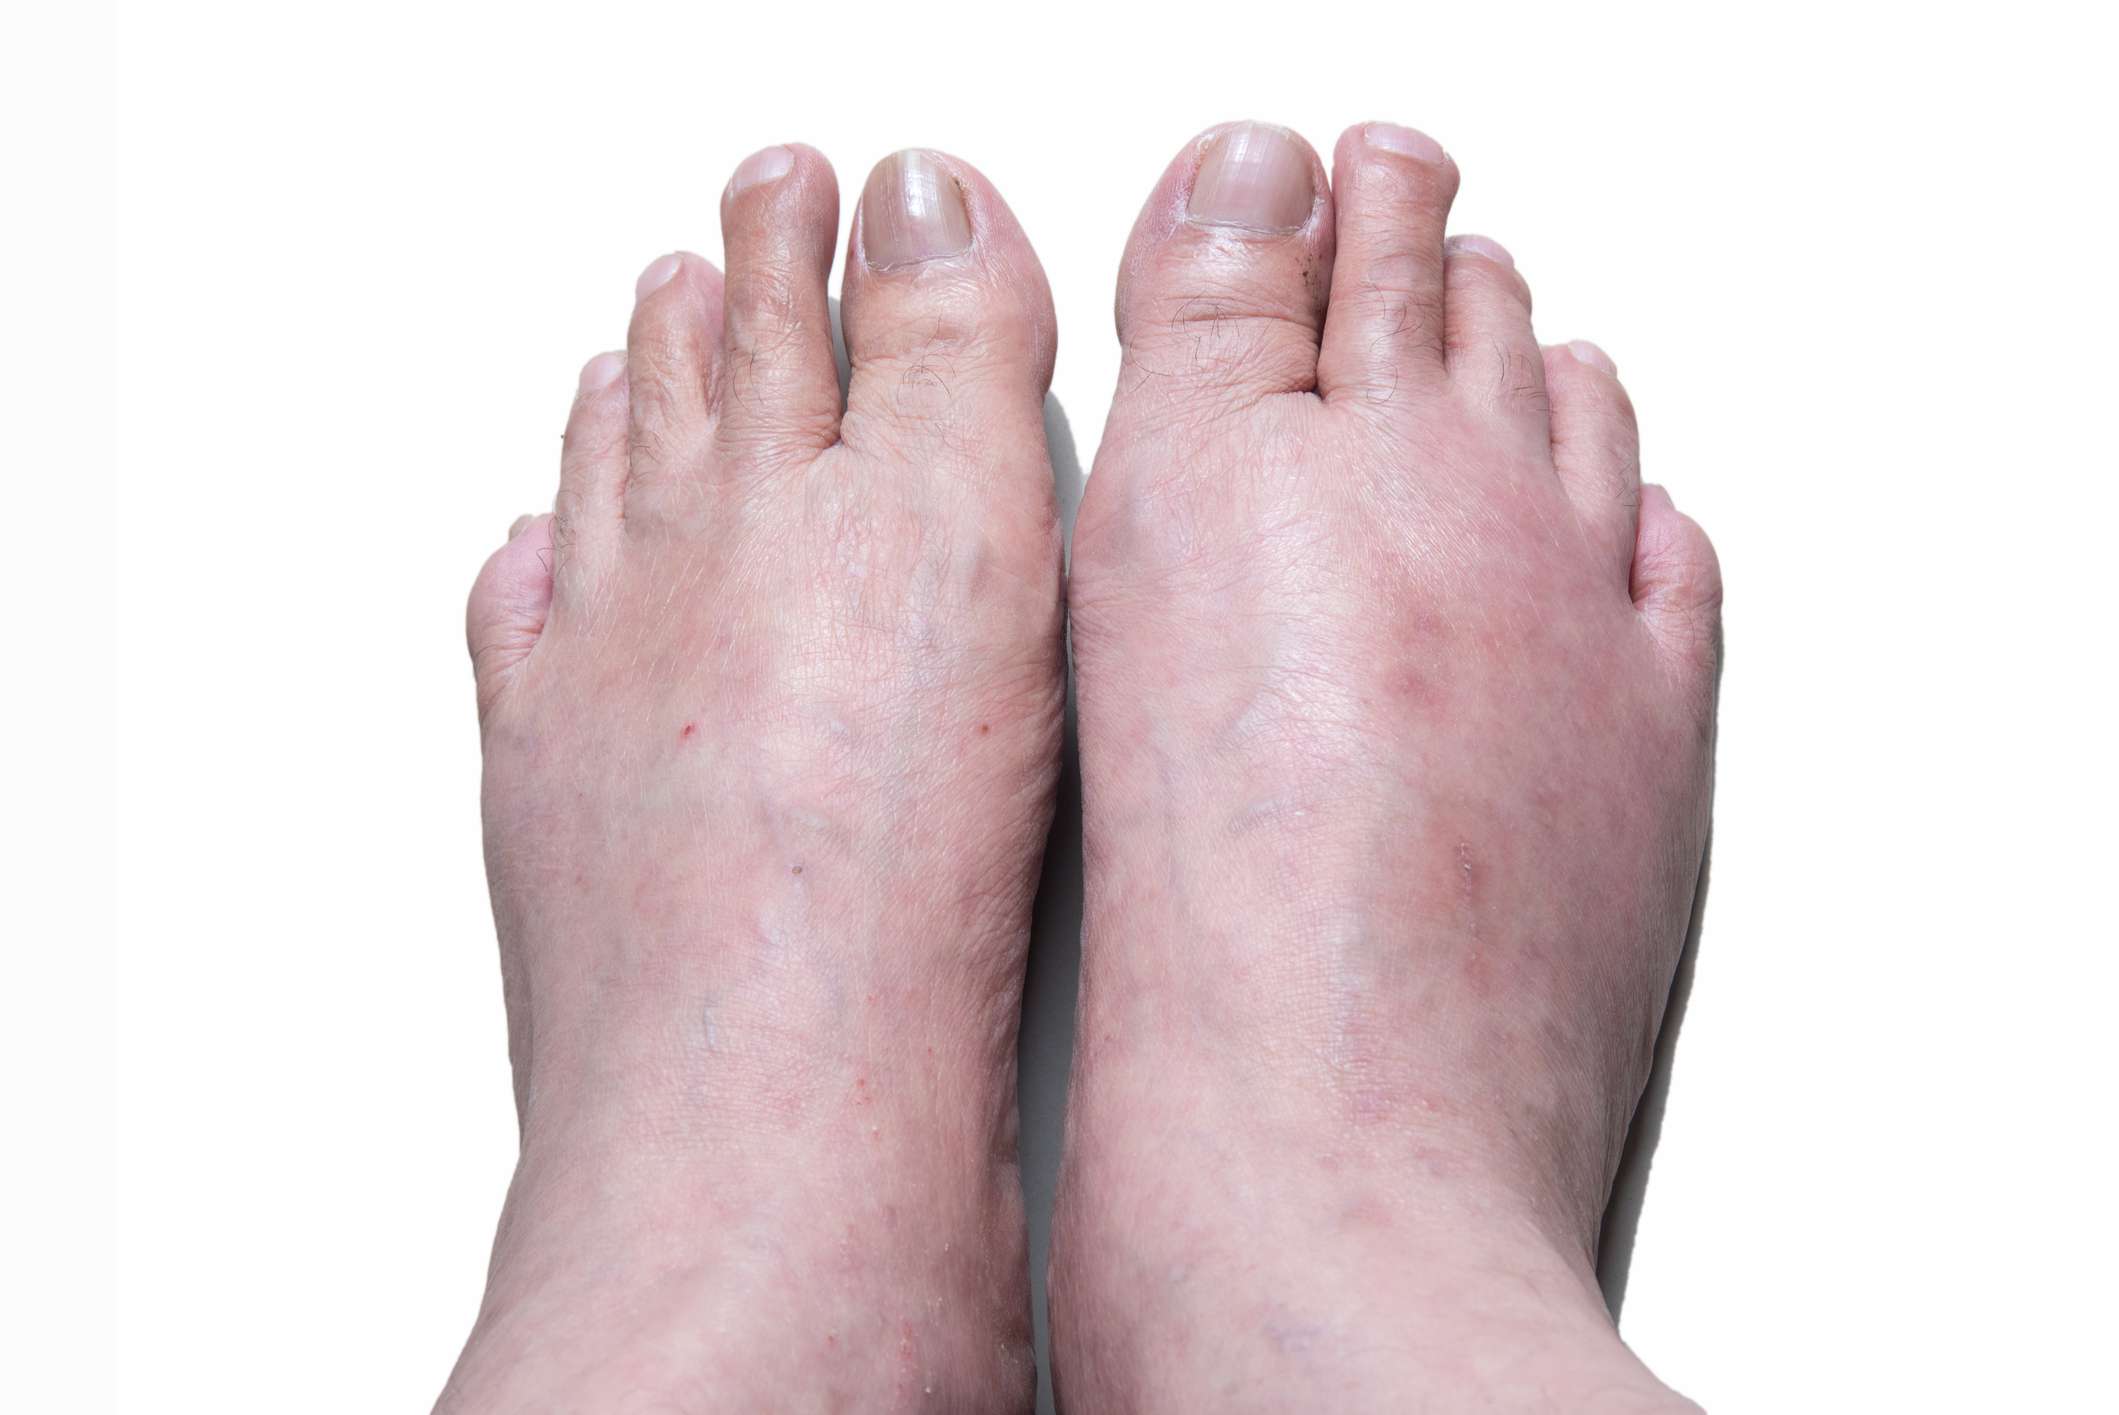 Gout: Symptoms, Pictures, Treatment, and More